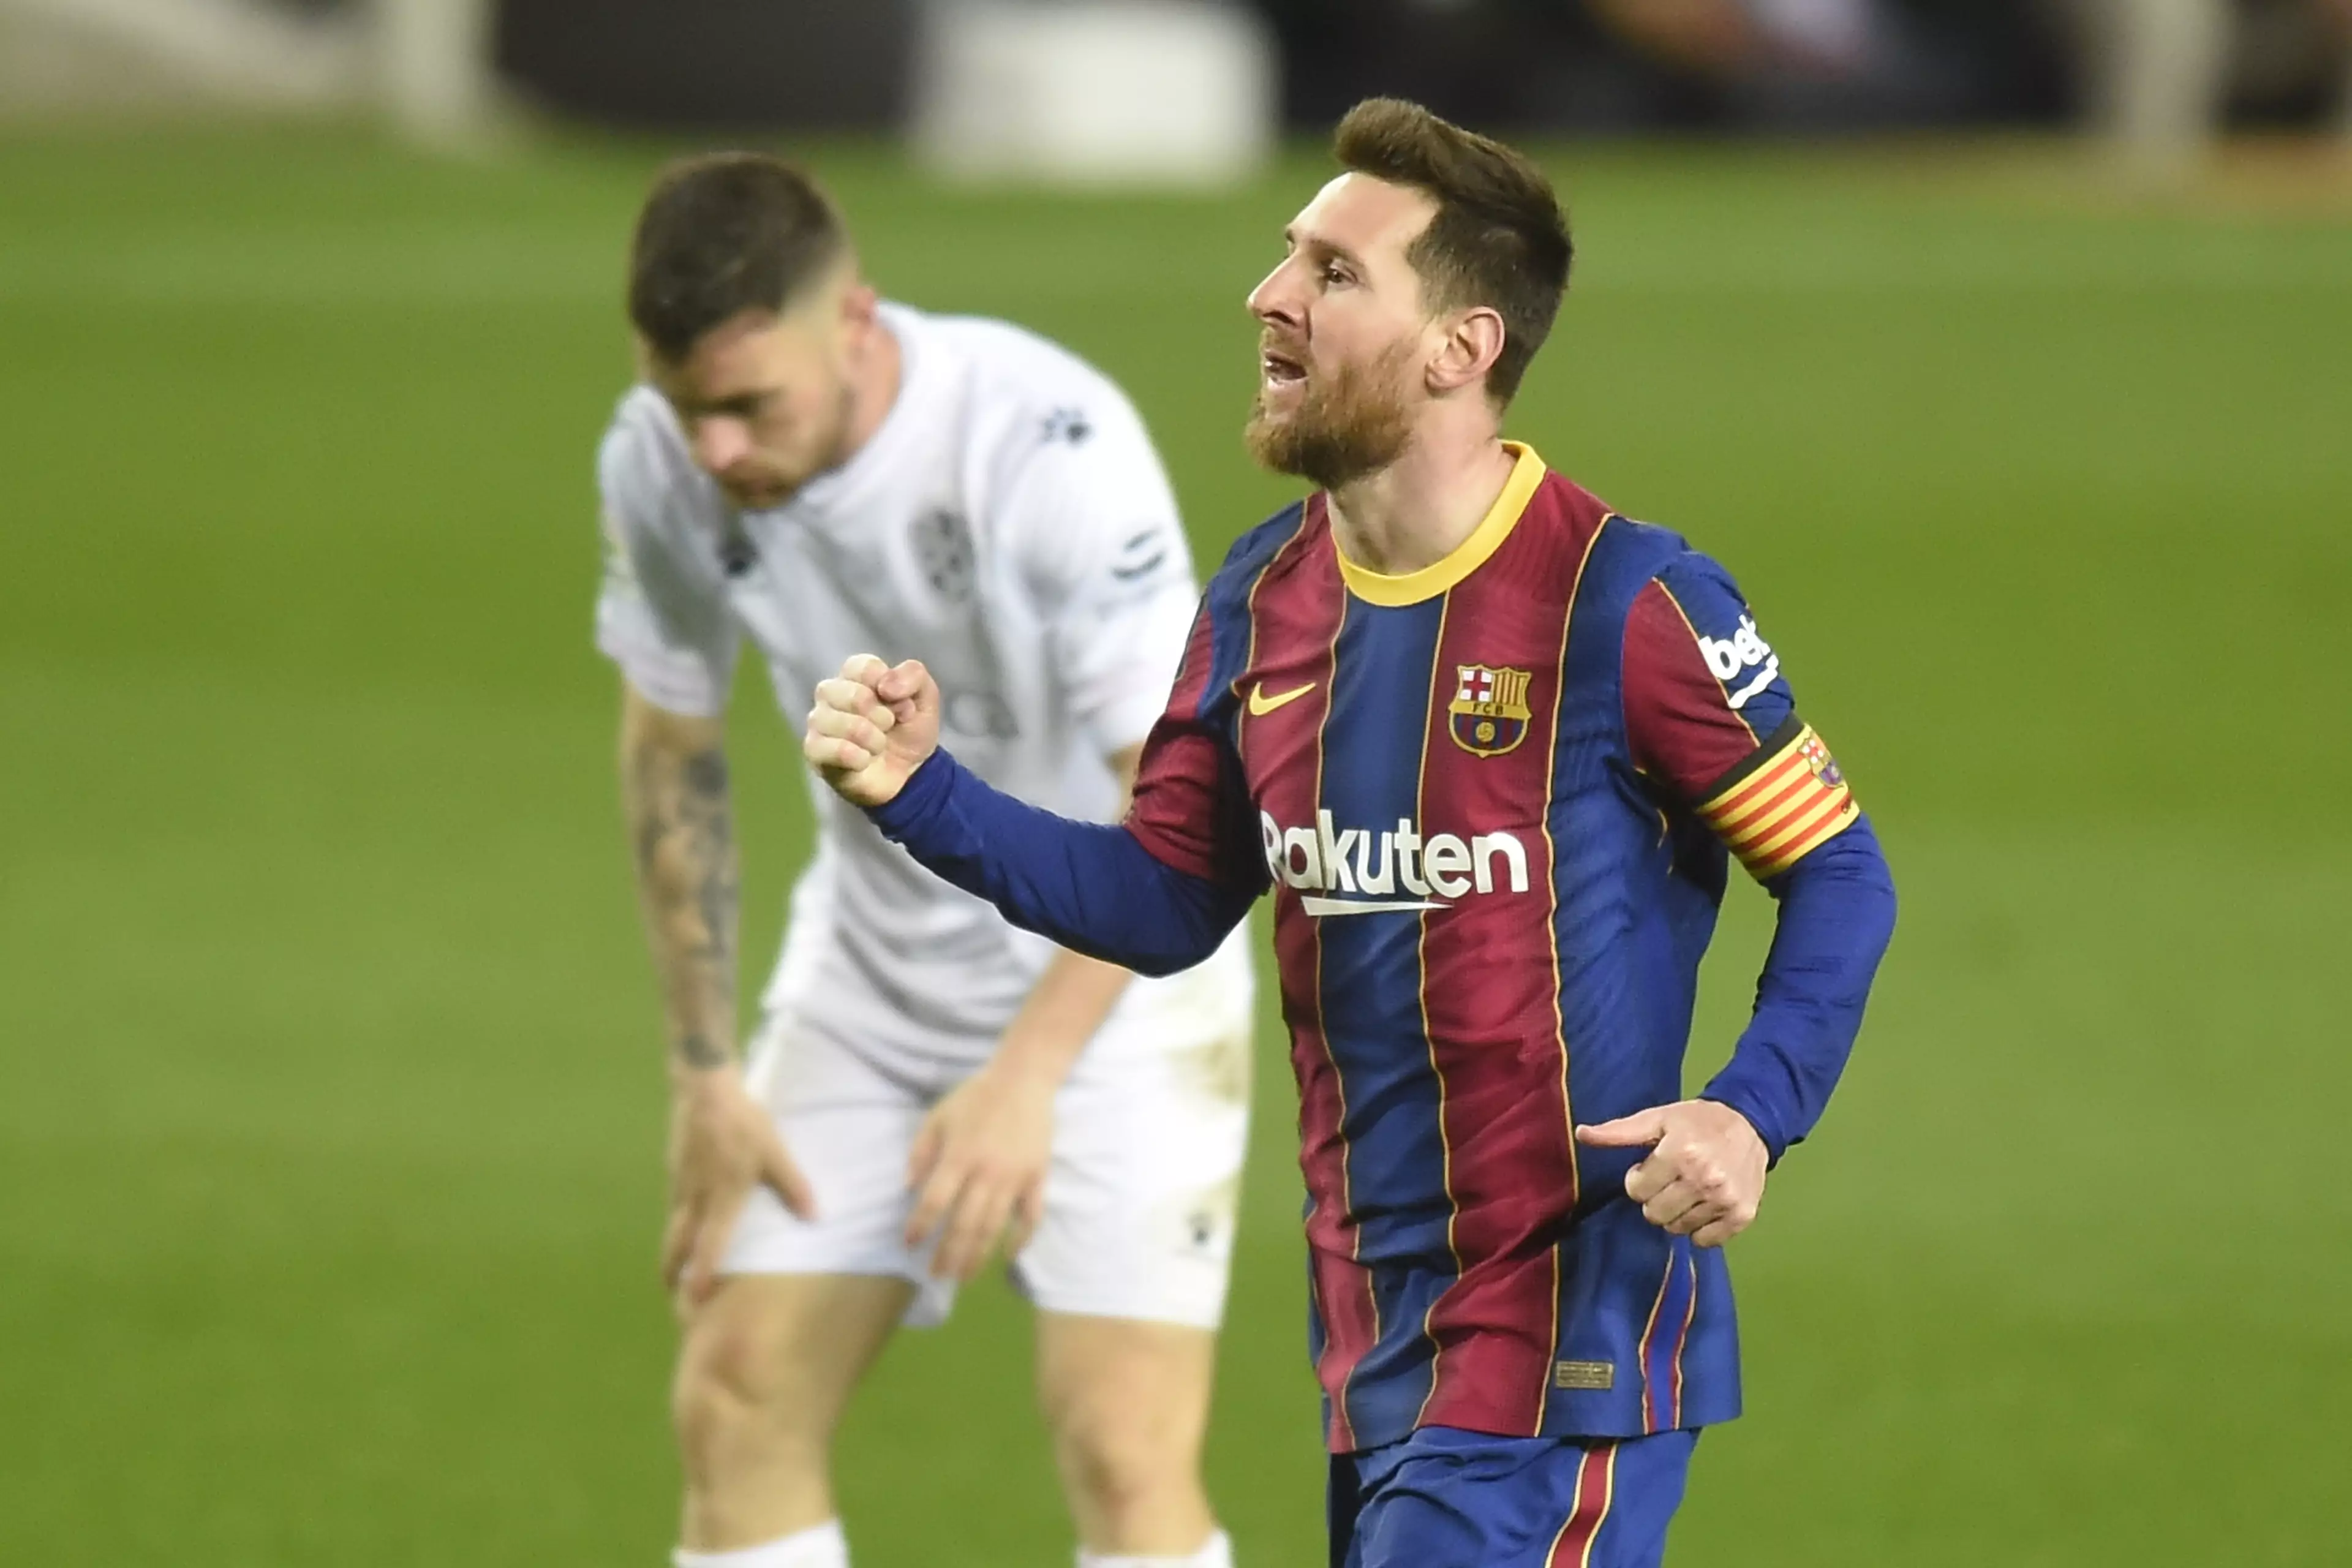 Barcelona are now in the hunt for the league title. Image: PA Images